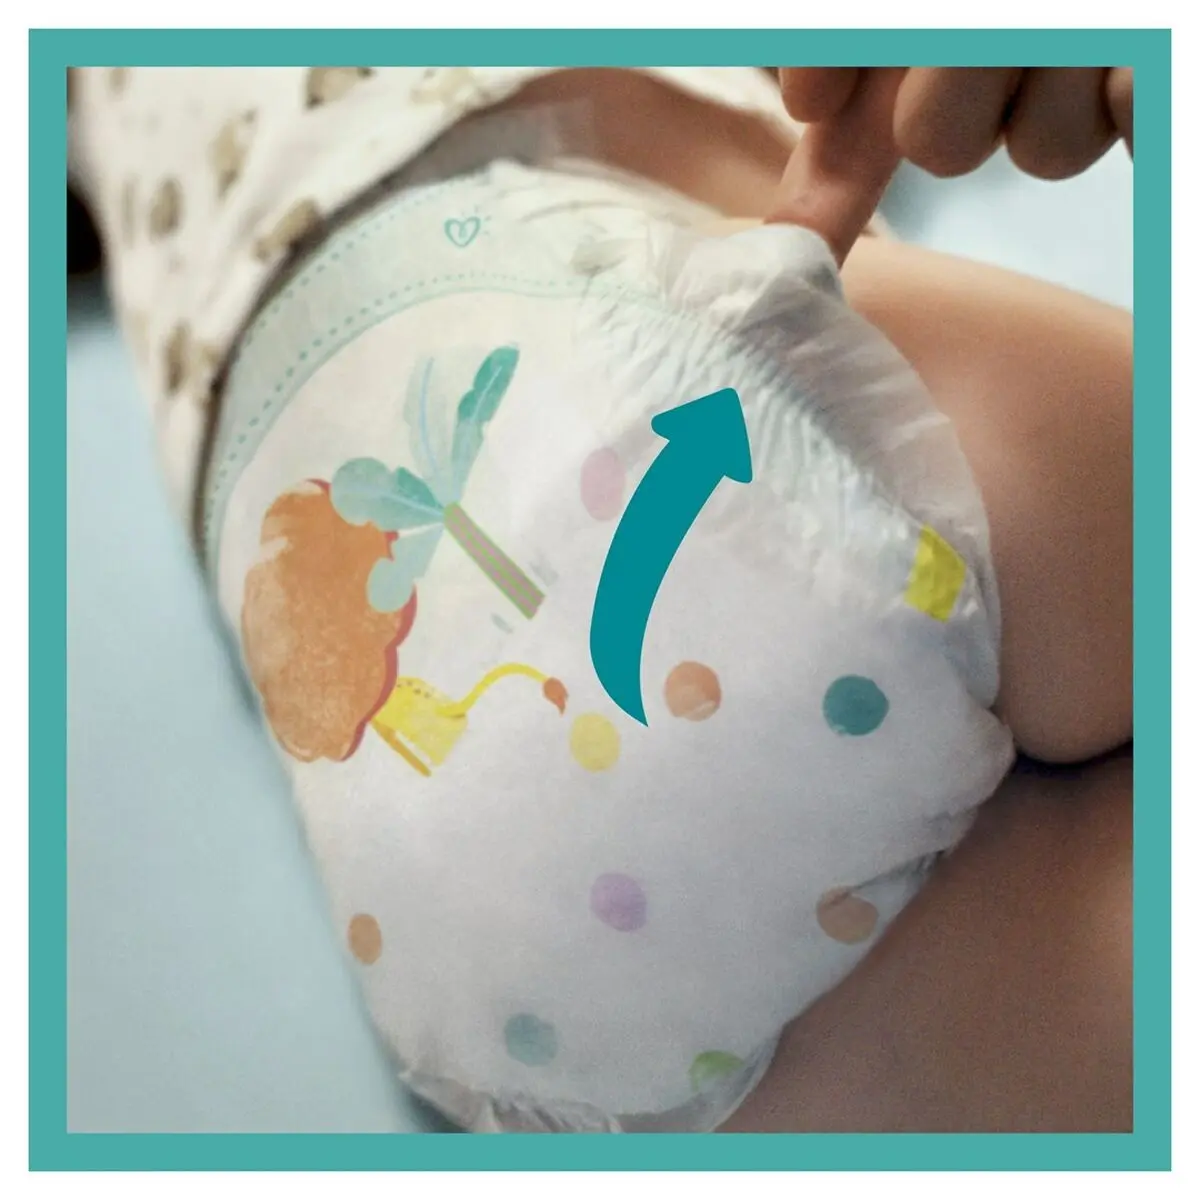 Pannolini usa e getta Pampers Active Baby 4